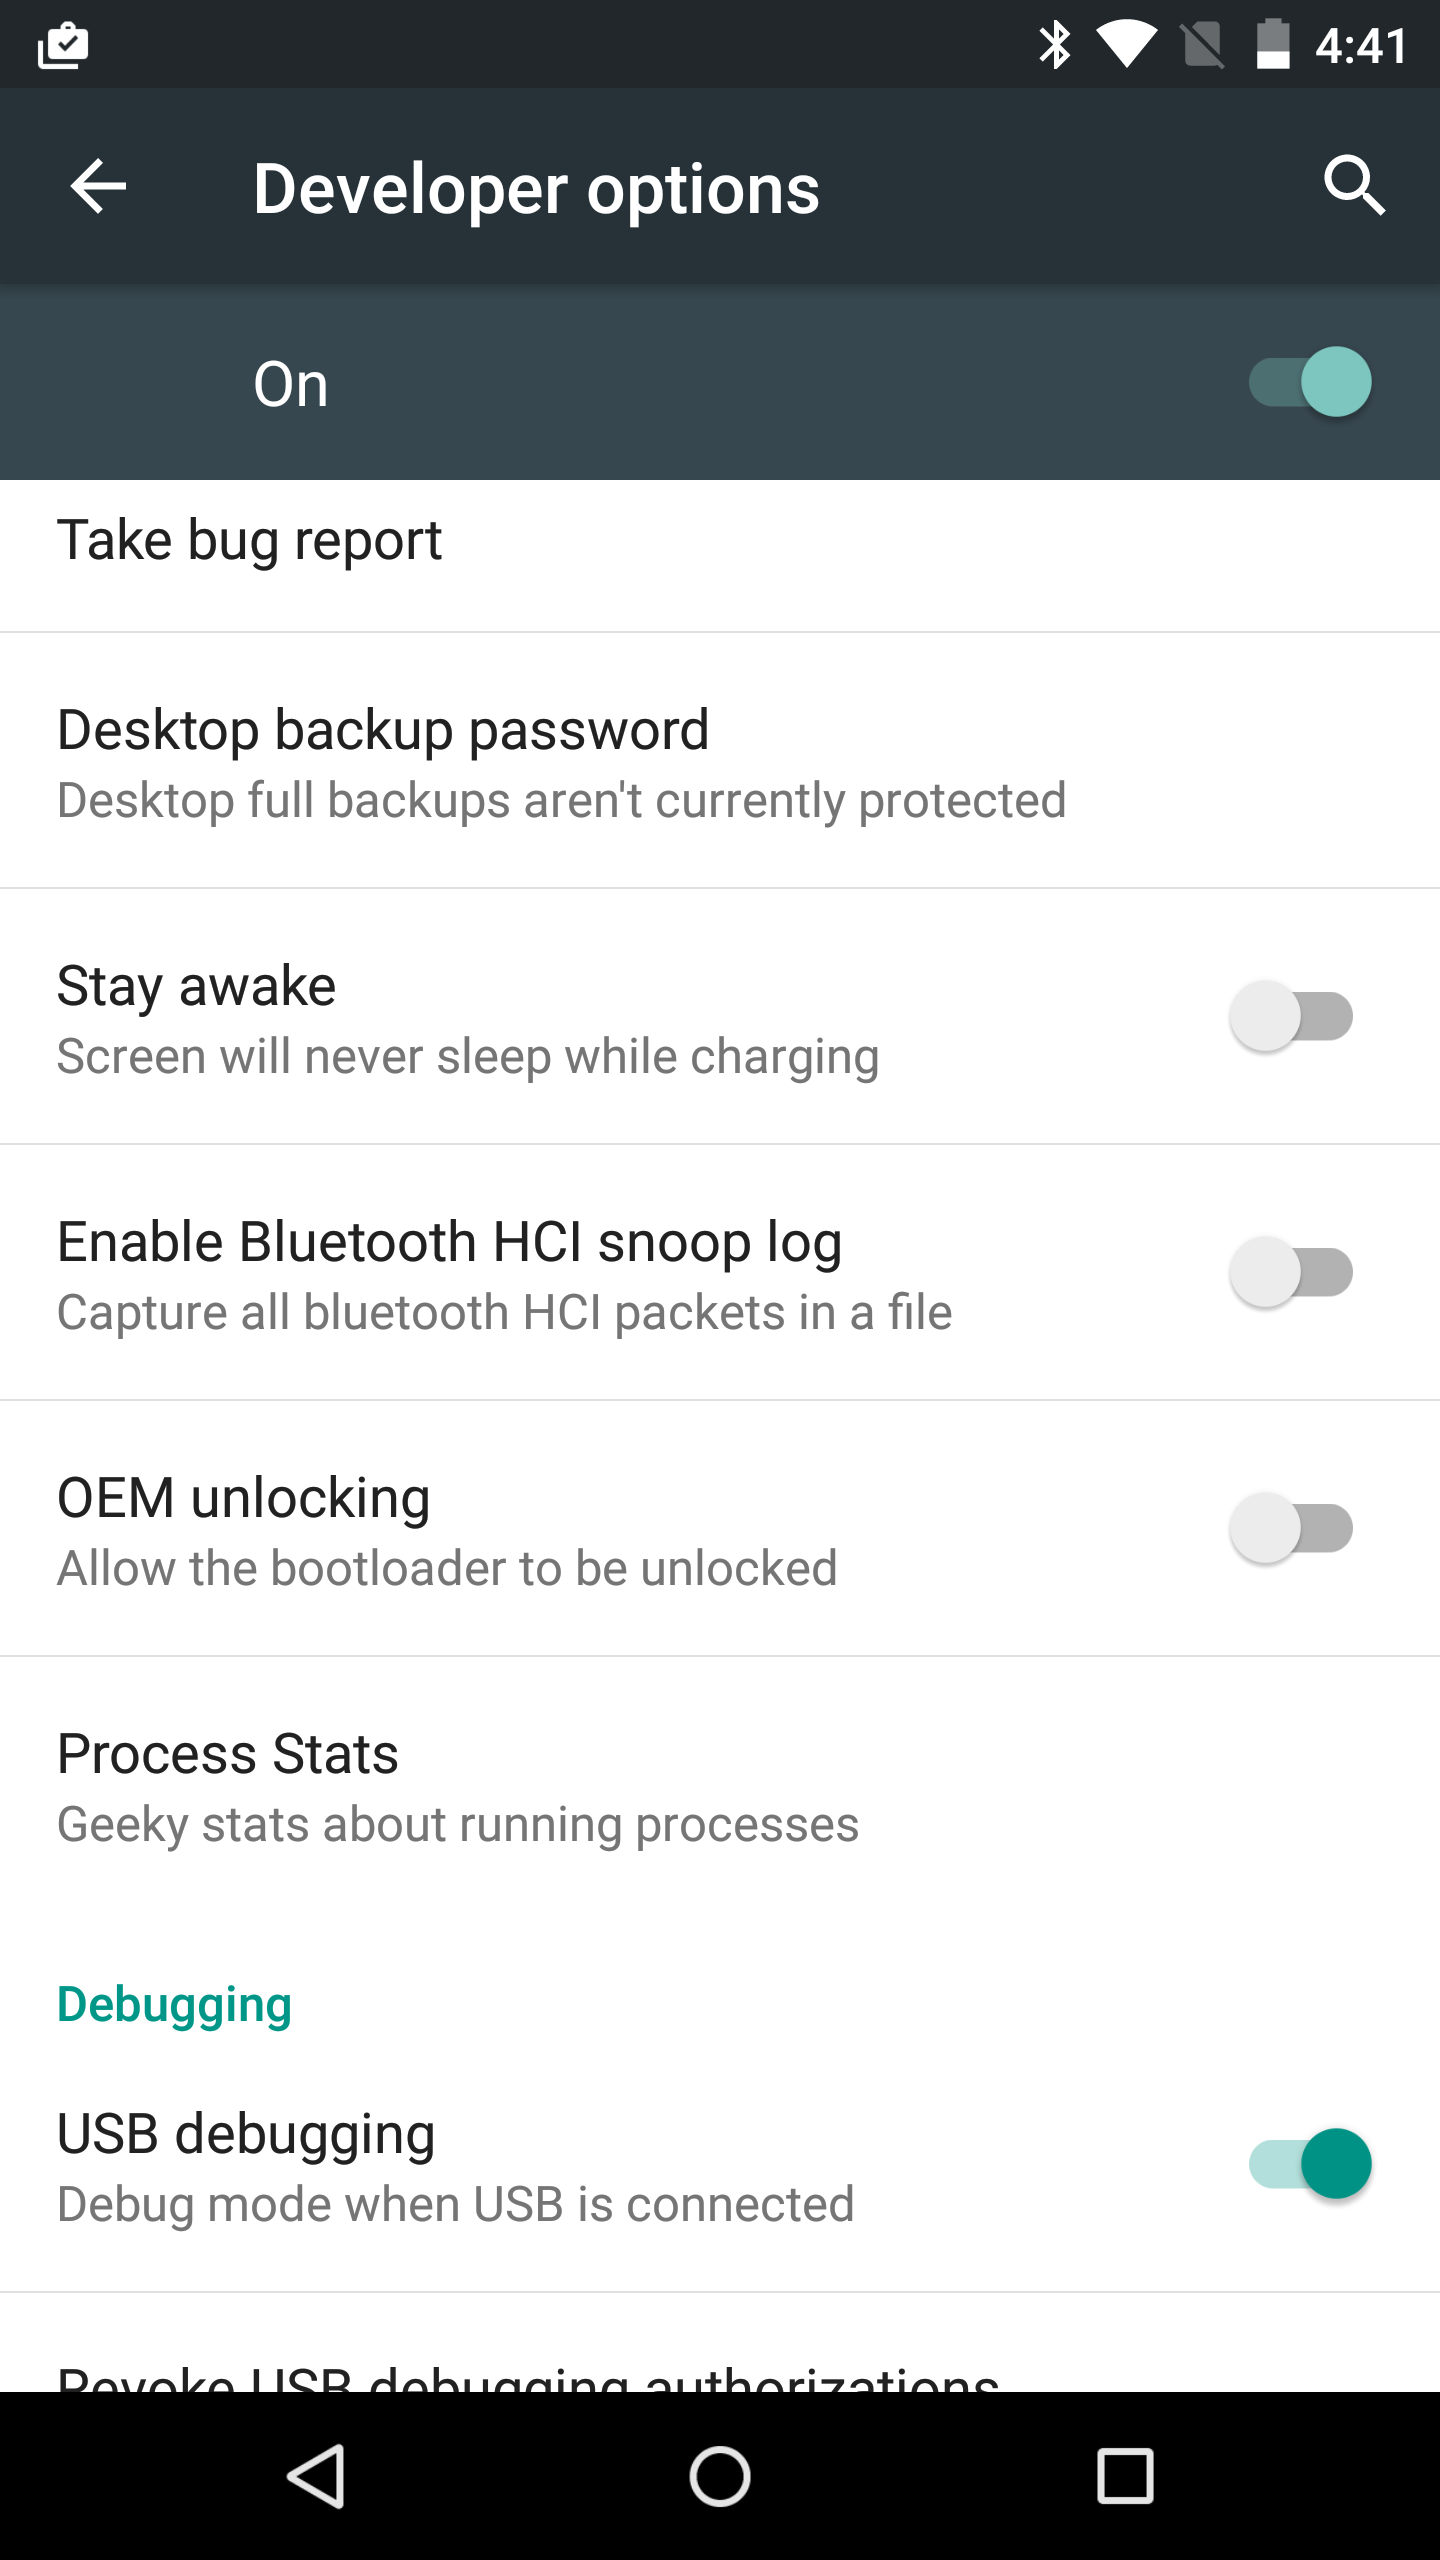 Configure Android to enable Bluetooth Capture to debug issues